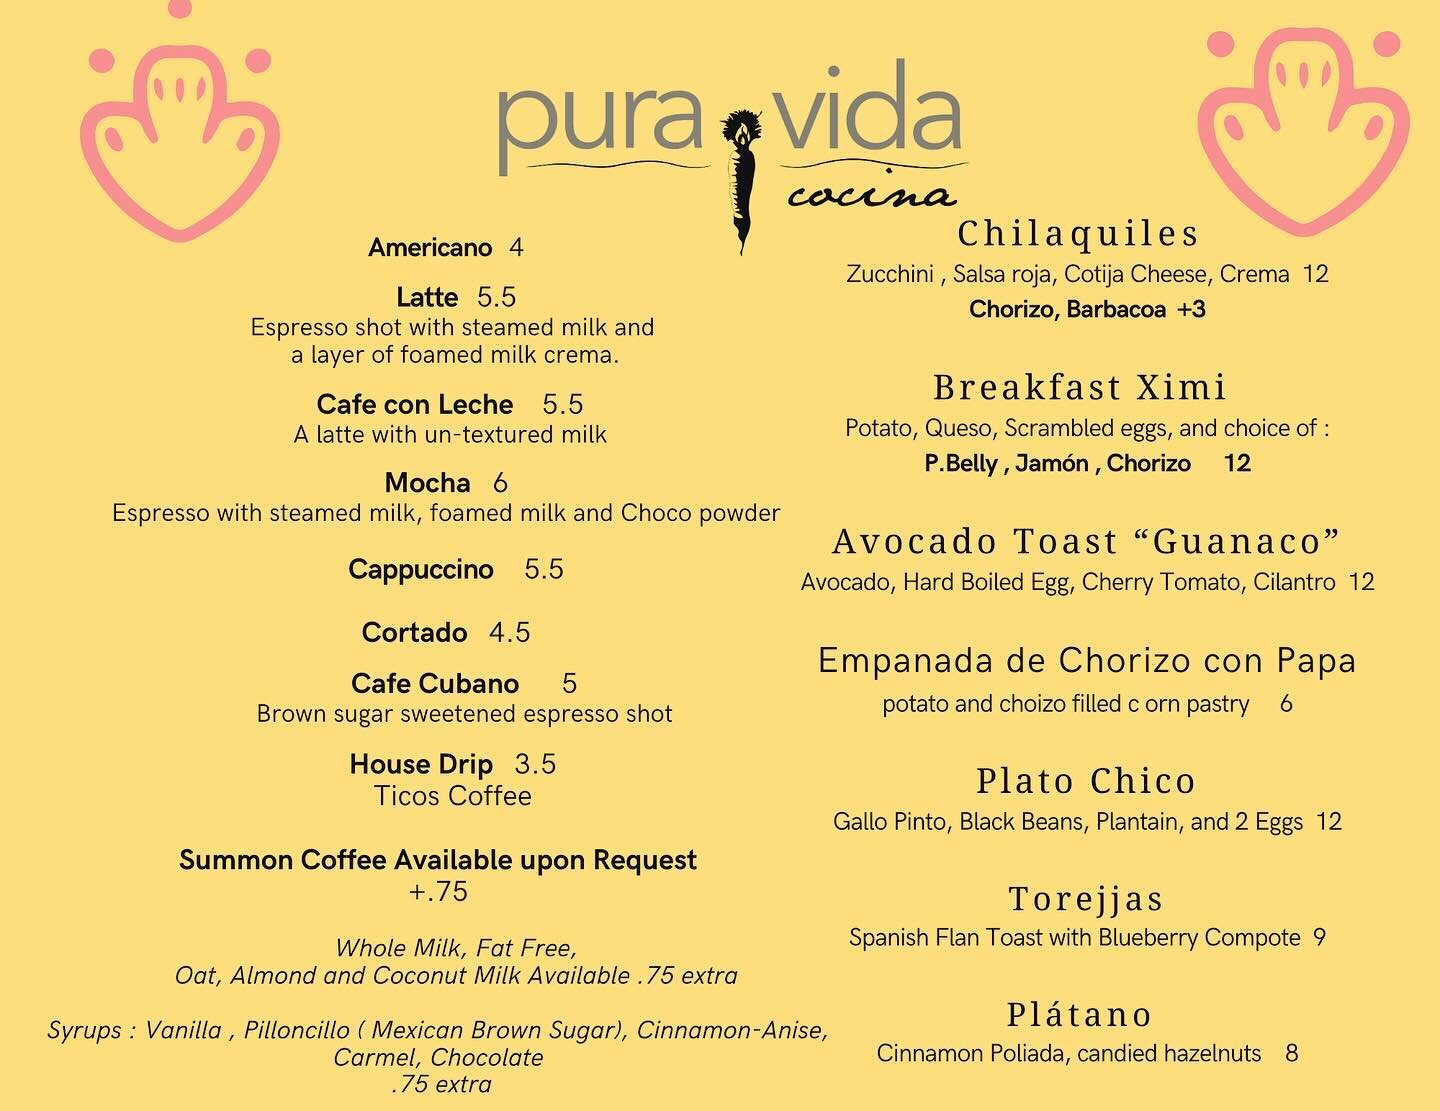 With the New Year a New Menu, available from 8-11am, Espresso service available all day. Keep an eye out for fun Latino inspired beverages made by the PV coffee crew and Brunch Specials from Chef Nelson and the PV kitchen.